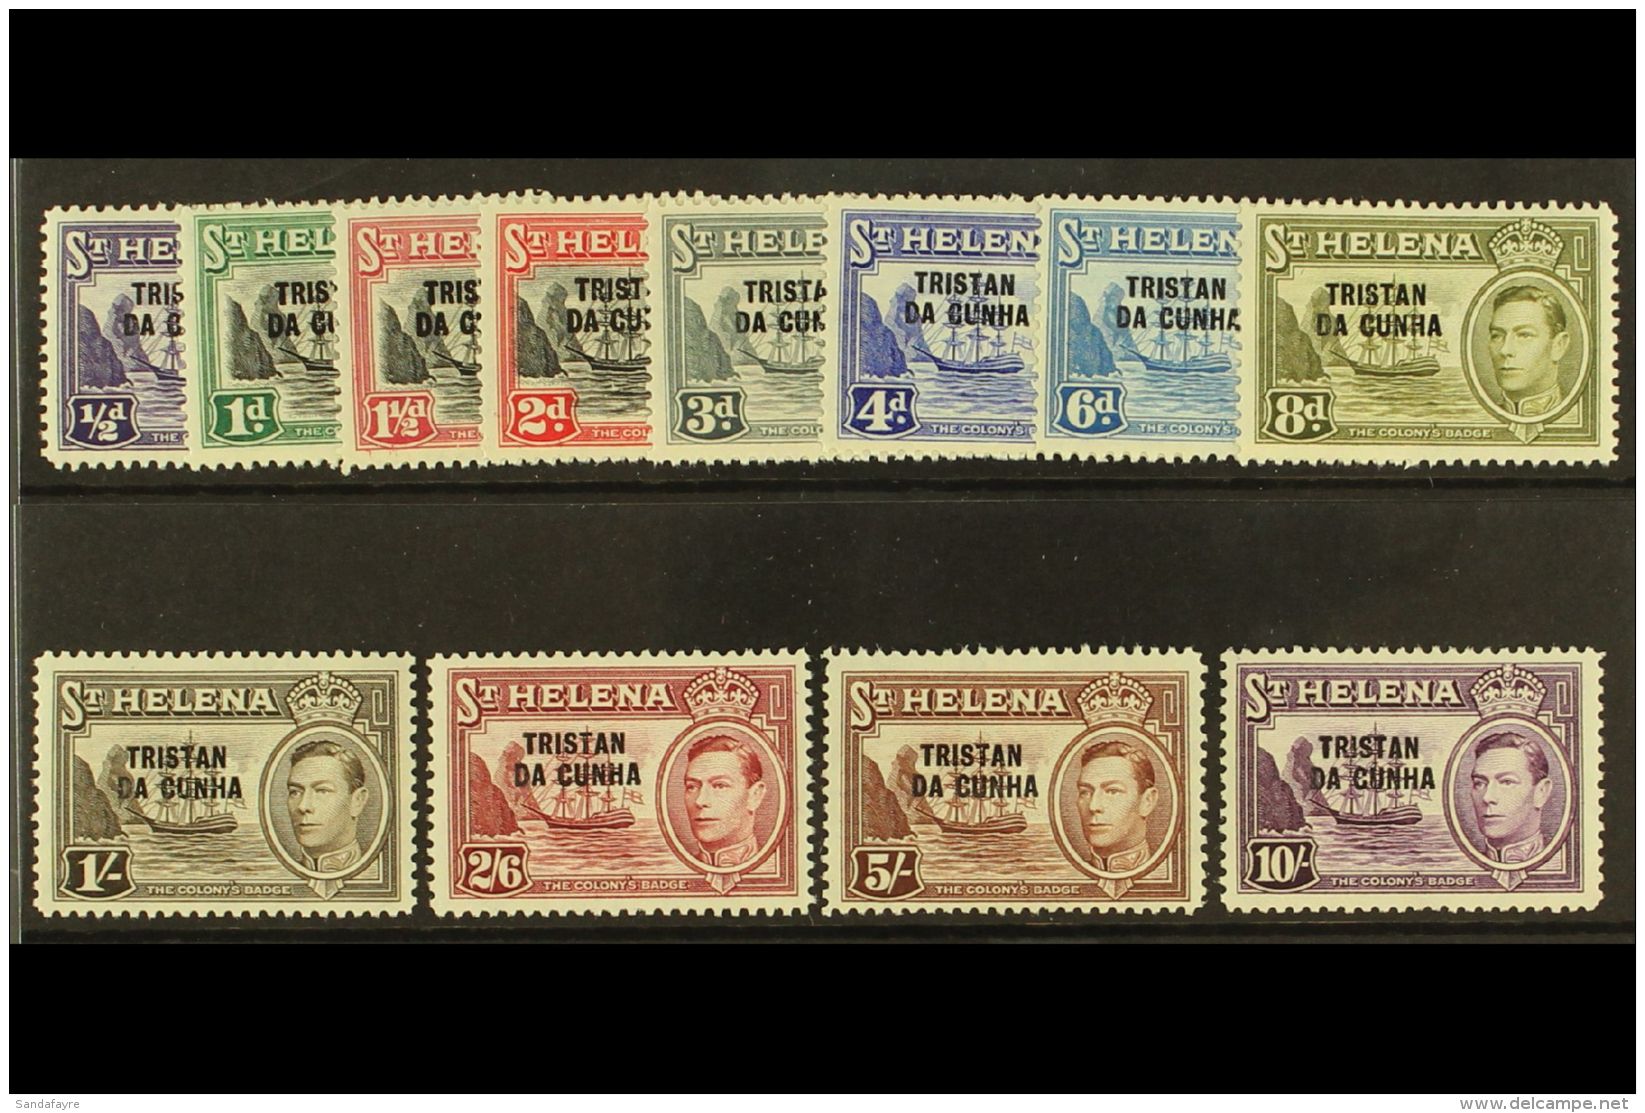 1952 KGVI Definitives Complete Set, SG 1/12, Very Fine Mint, All Values Except The 10s Never Hinged. (12 Stamps)... - Tristan Da Cunha